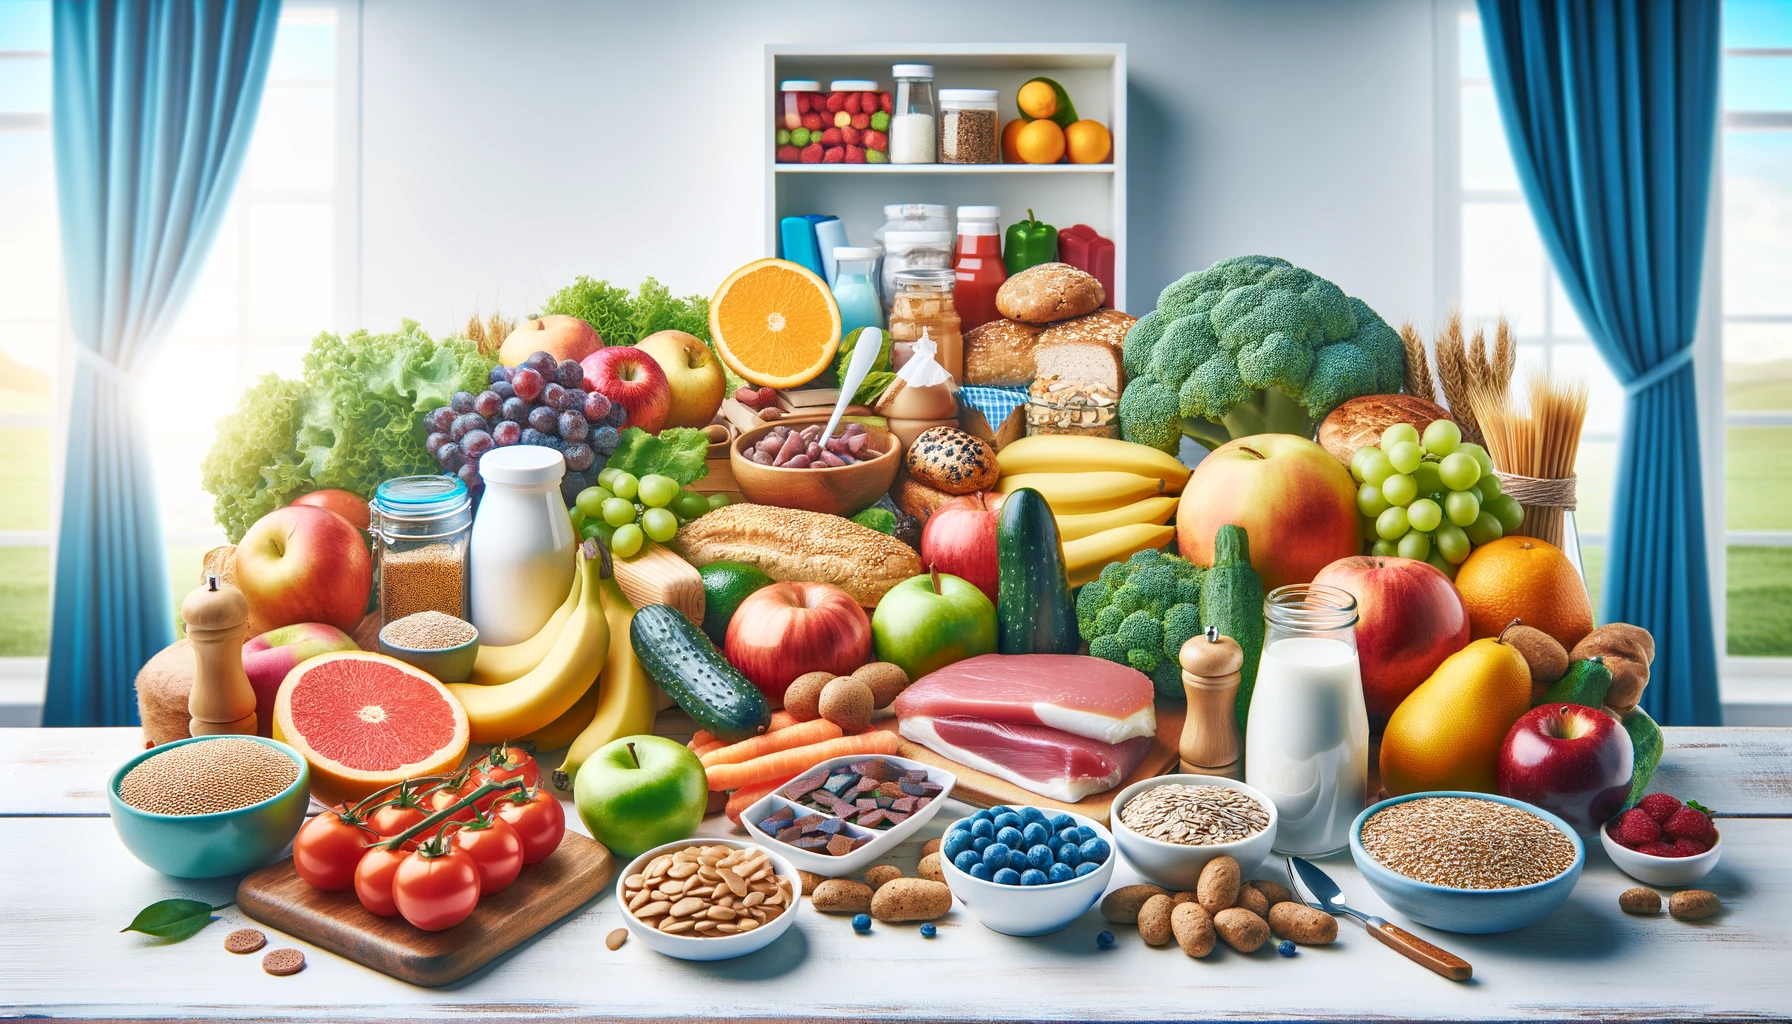 A variety of healthy foods for diabetics arranged on a table including fruits vegetables whole grains and lean proteins in a bright